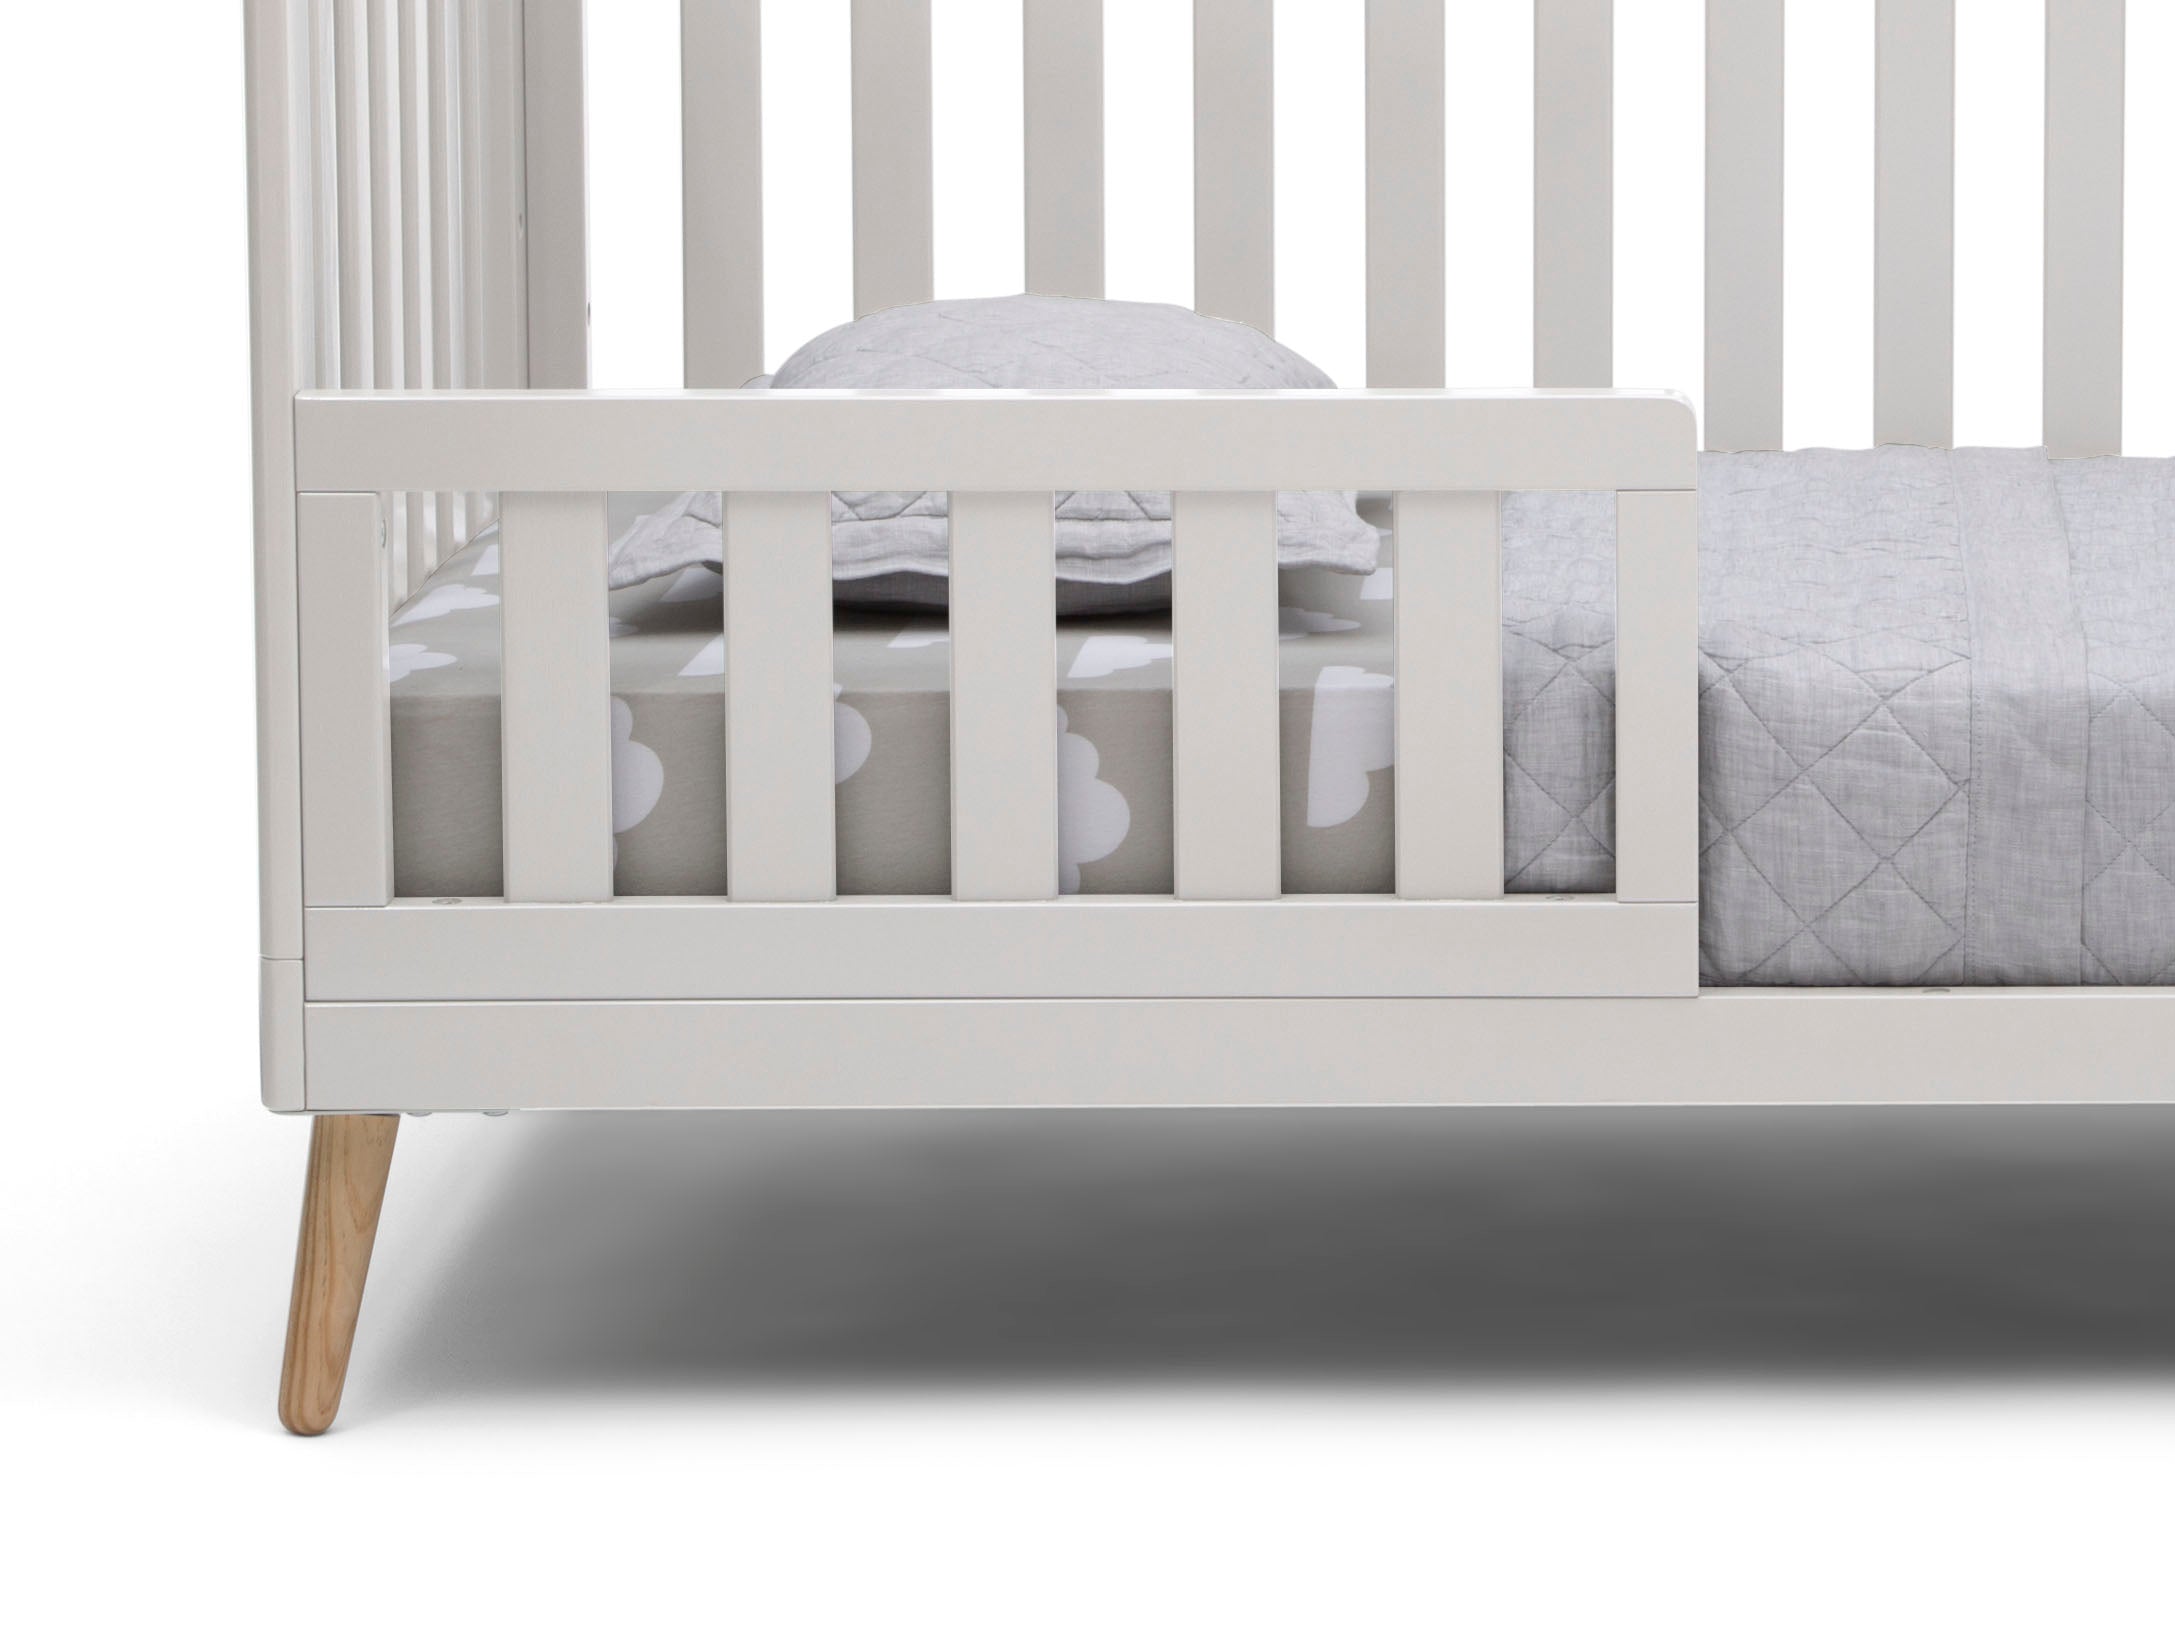 king size bed rails for toddlers